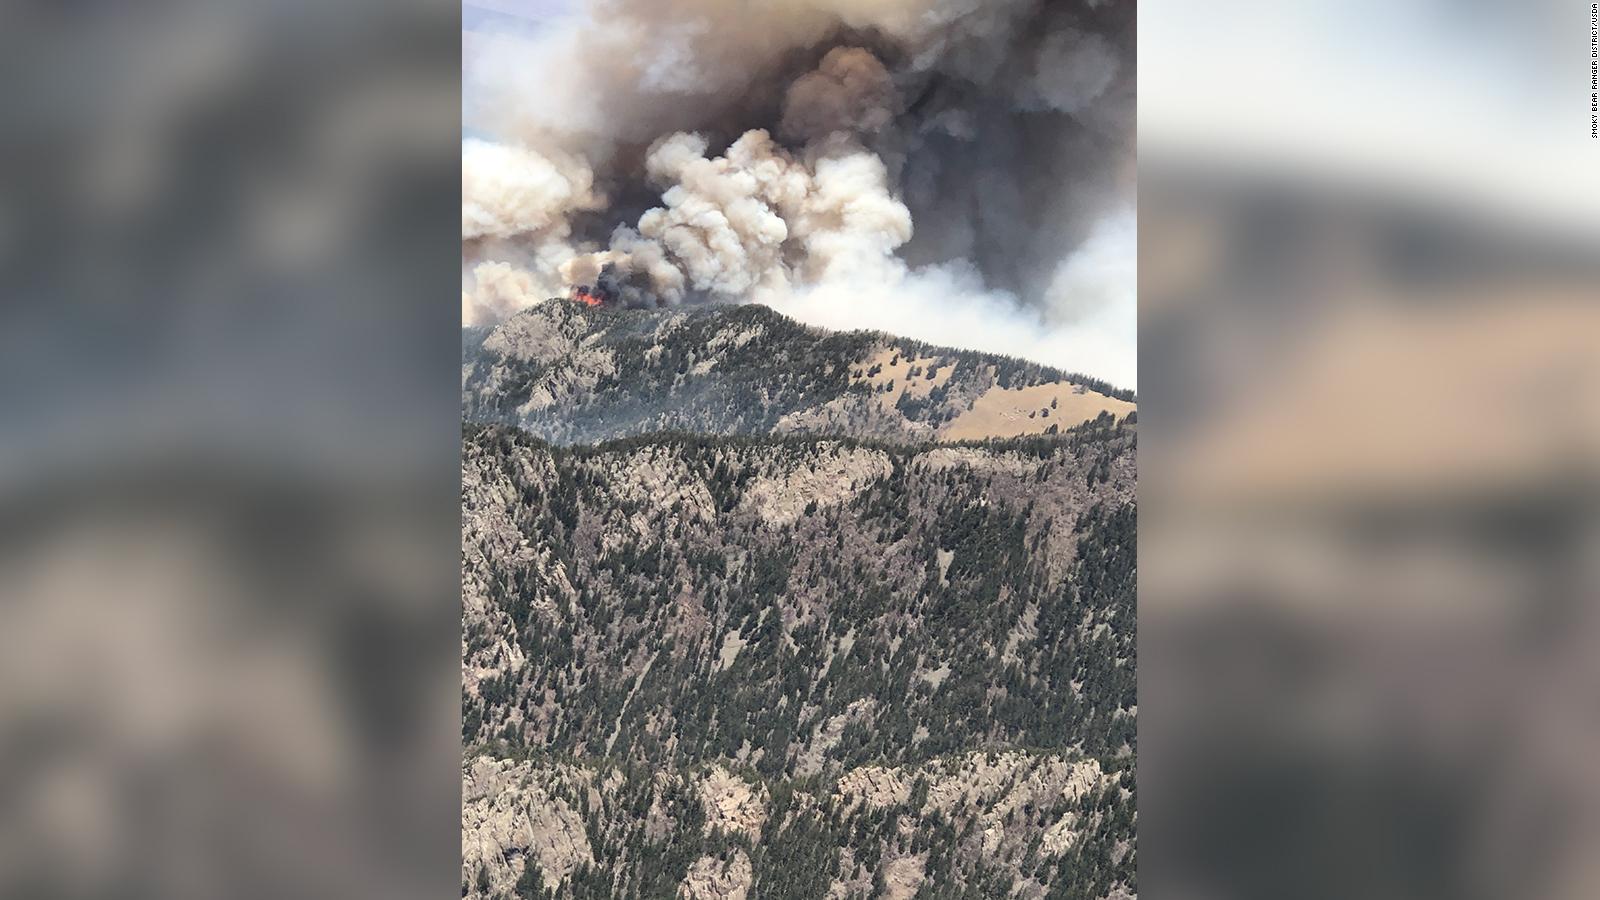 Three Rivers Fire New Mexico wildfire has charred at least 12,000